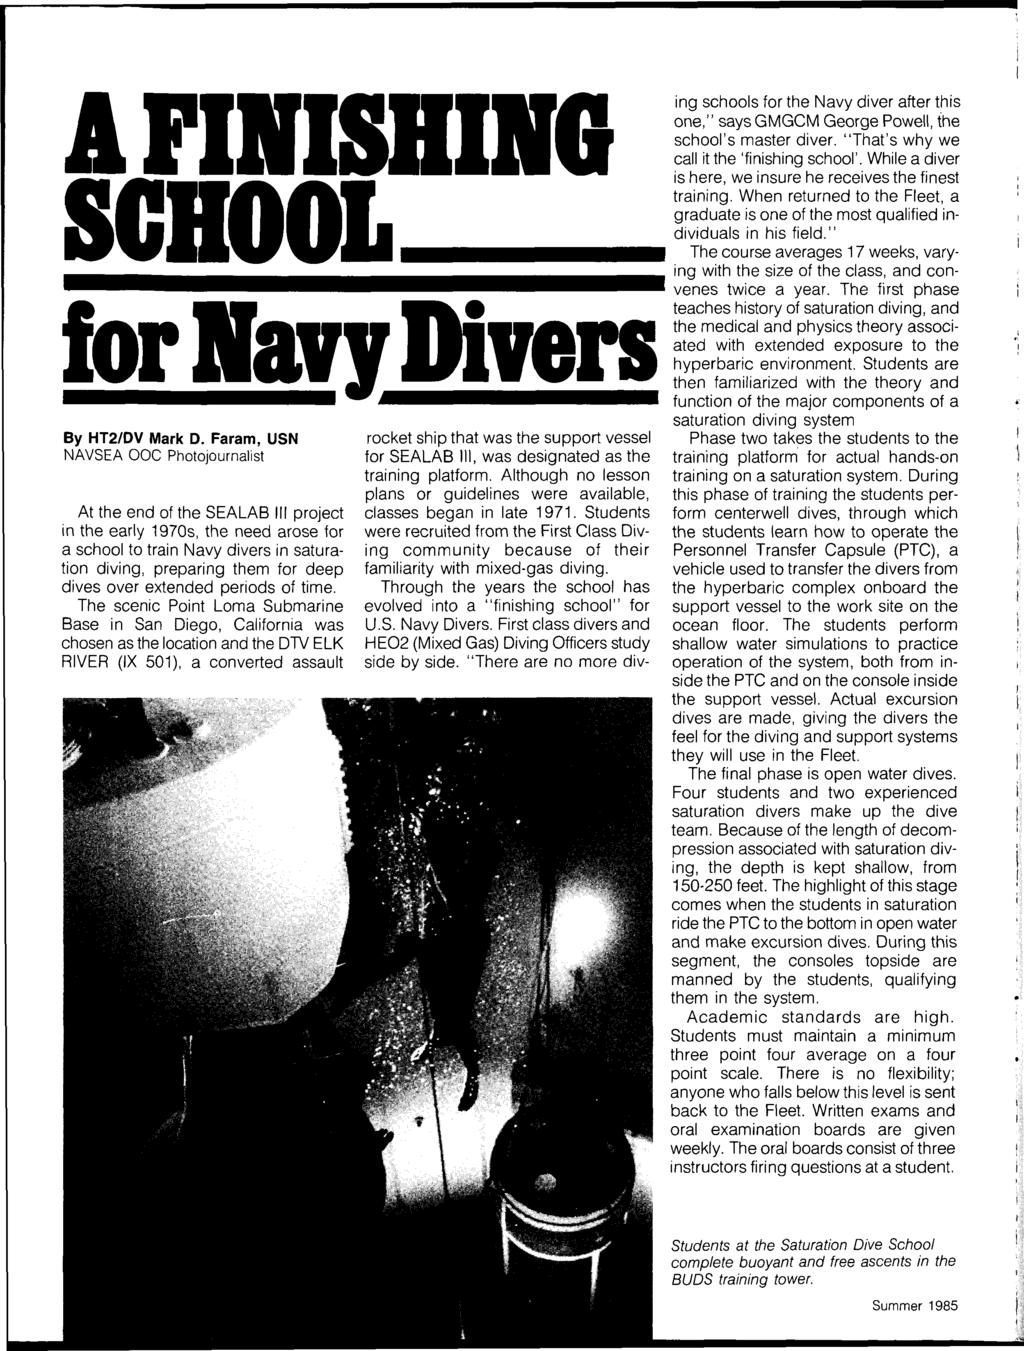 A SCHOOL for Navy Divers By HT2/DV Mark D.